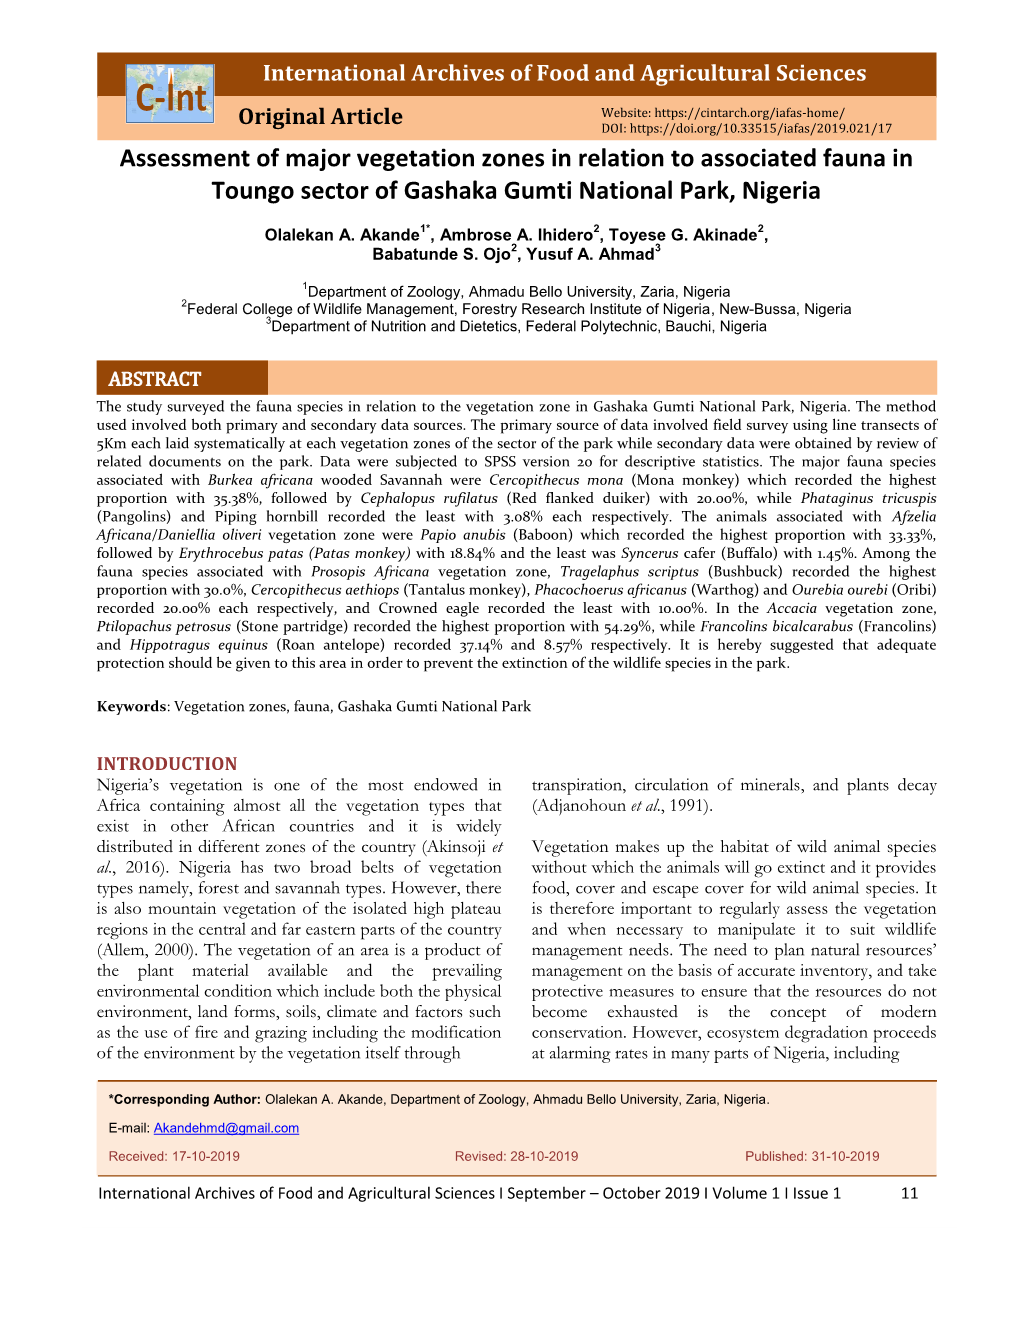 Assessment of Major Vegetation Zones in Relation to Associated Fauna in Toungo Sector of Gashaka Gumti National Park, Nigeria